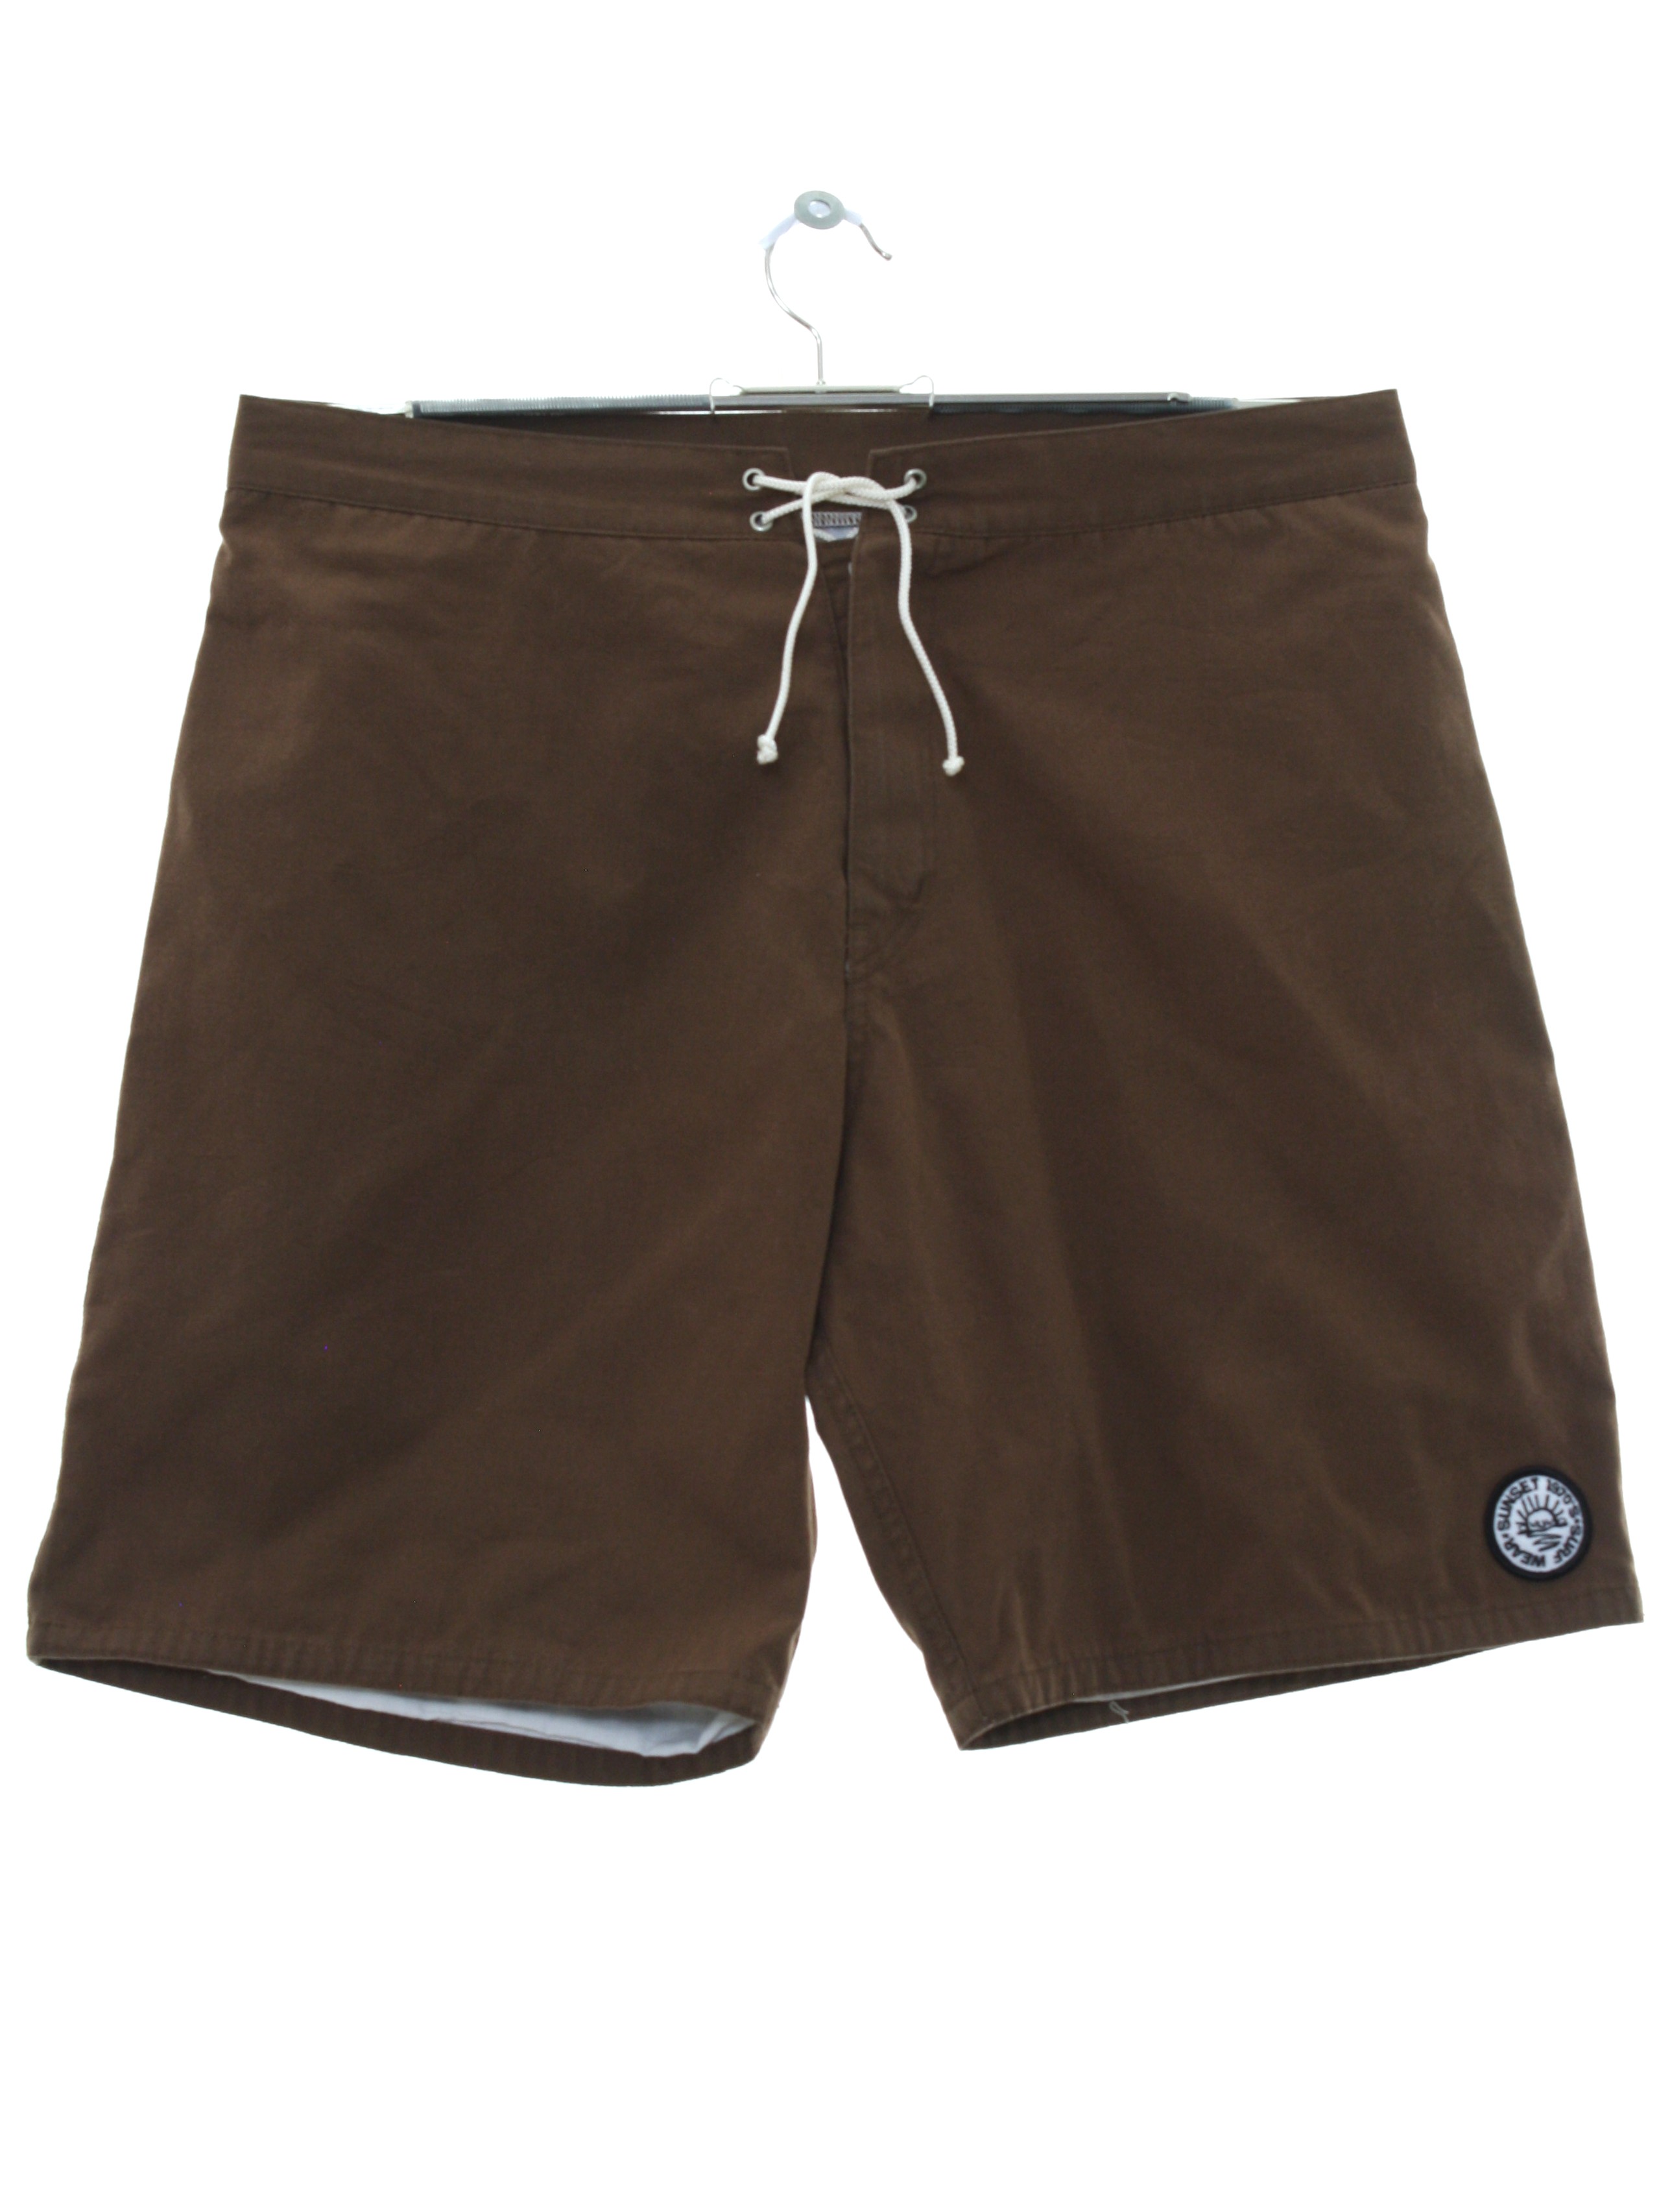 Shorts: 90s -Care Label Only- Mens cocoa brown background cotton ...